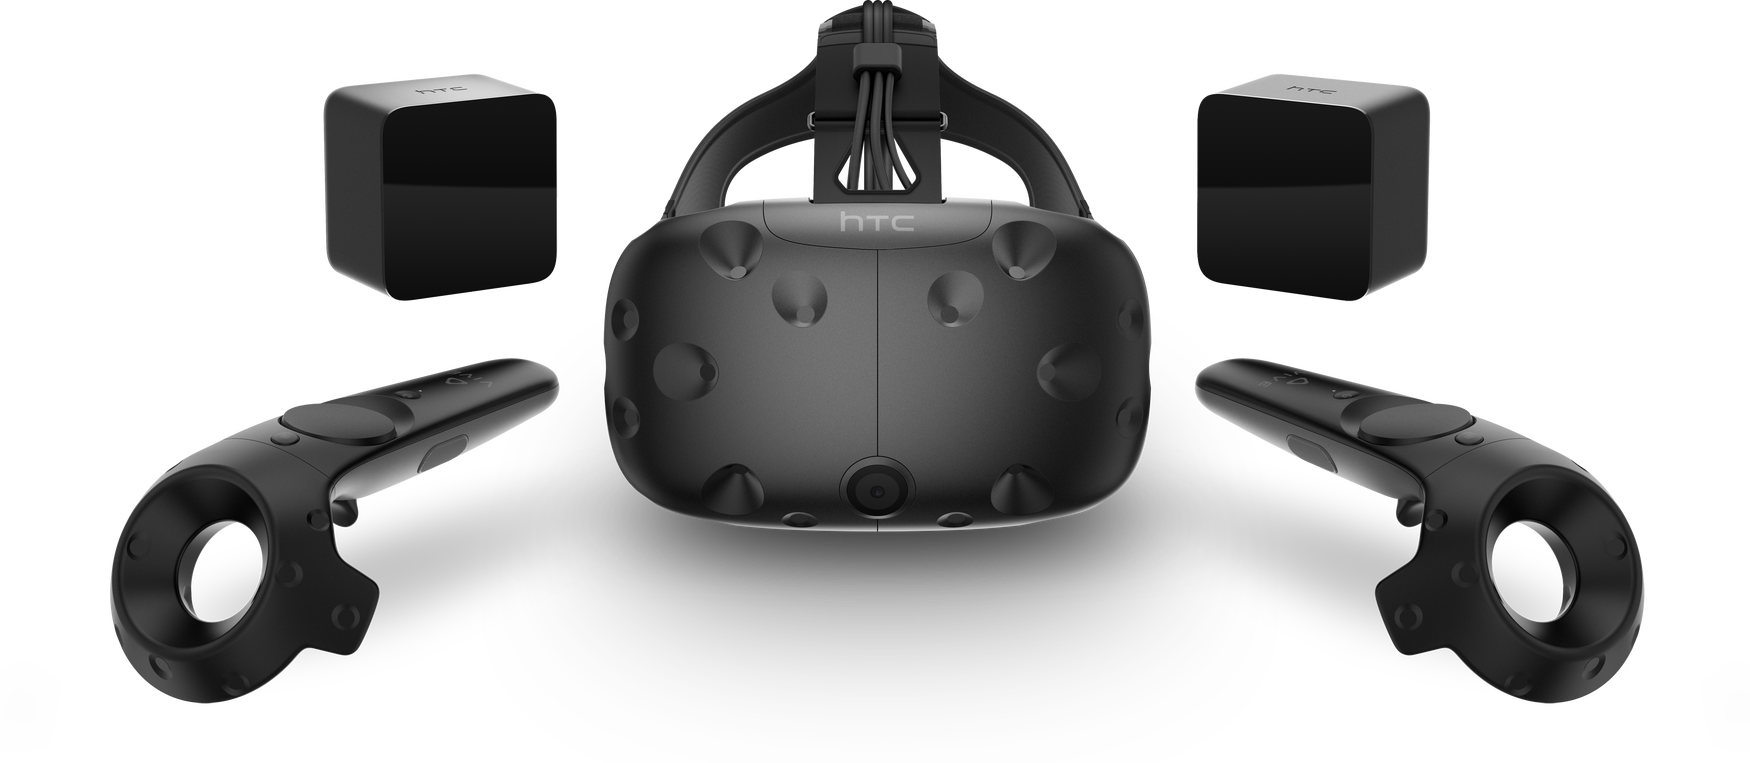 HTC Vive: Five Months Later